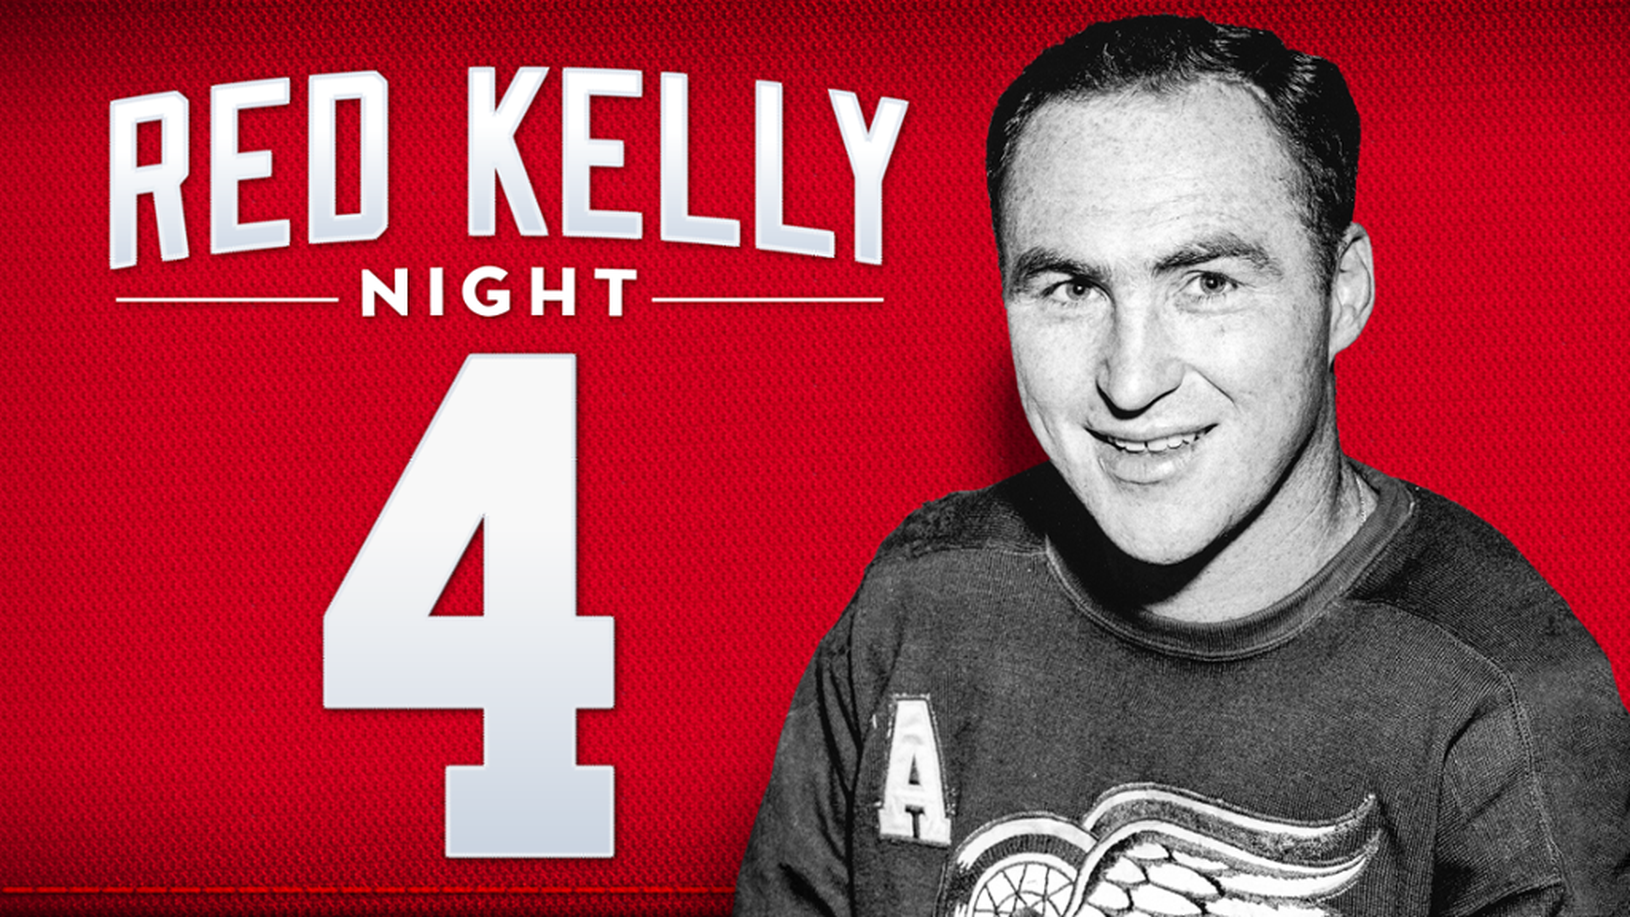 Red Kelly